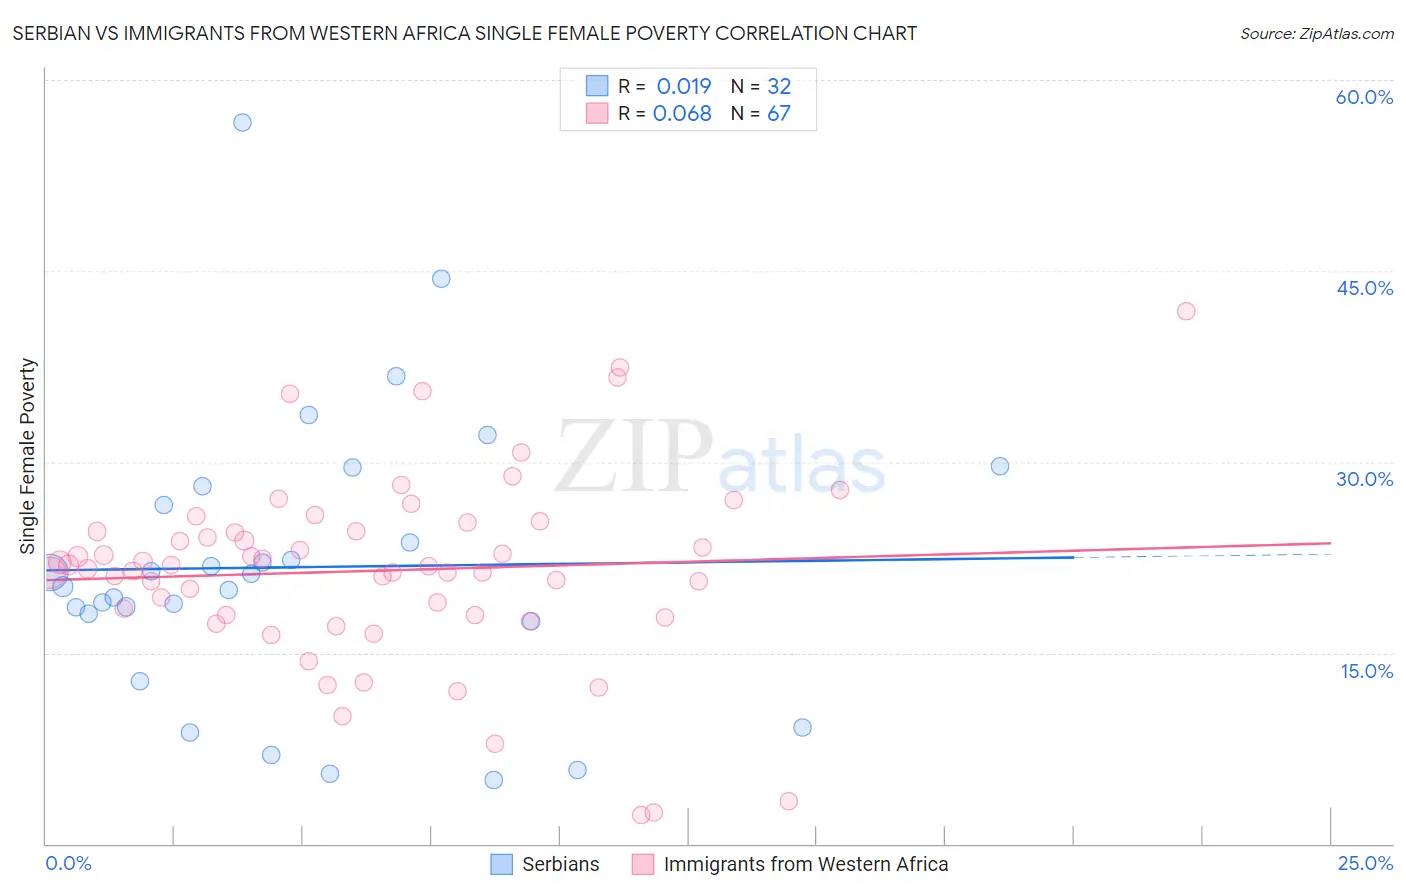 Serbian vs Immigrants from Western Africa Single Female Poverty